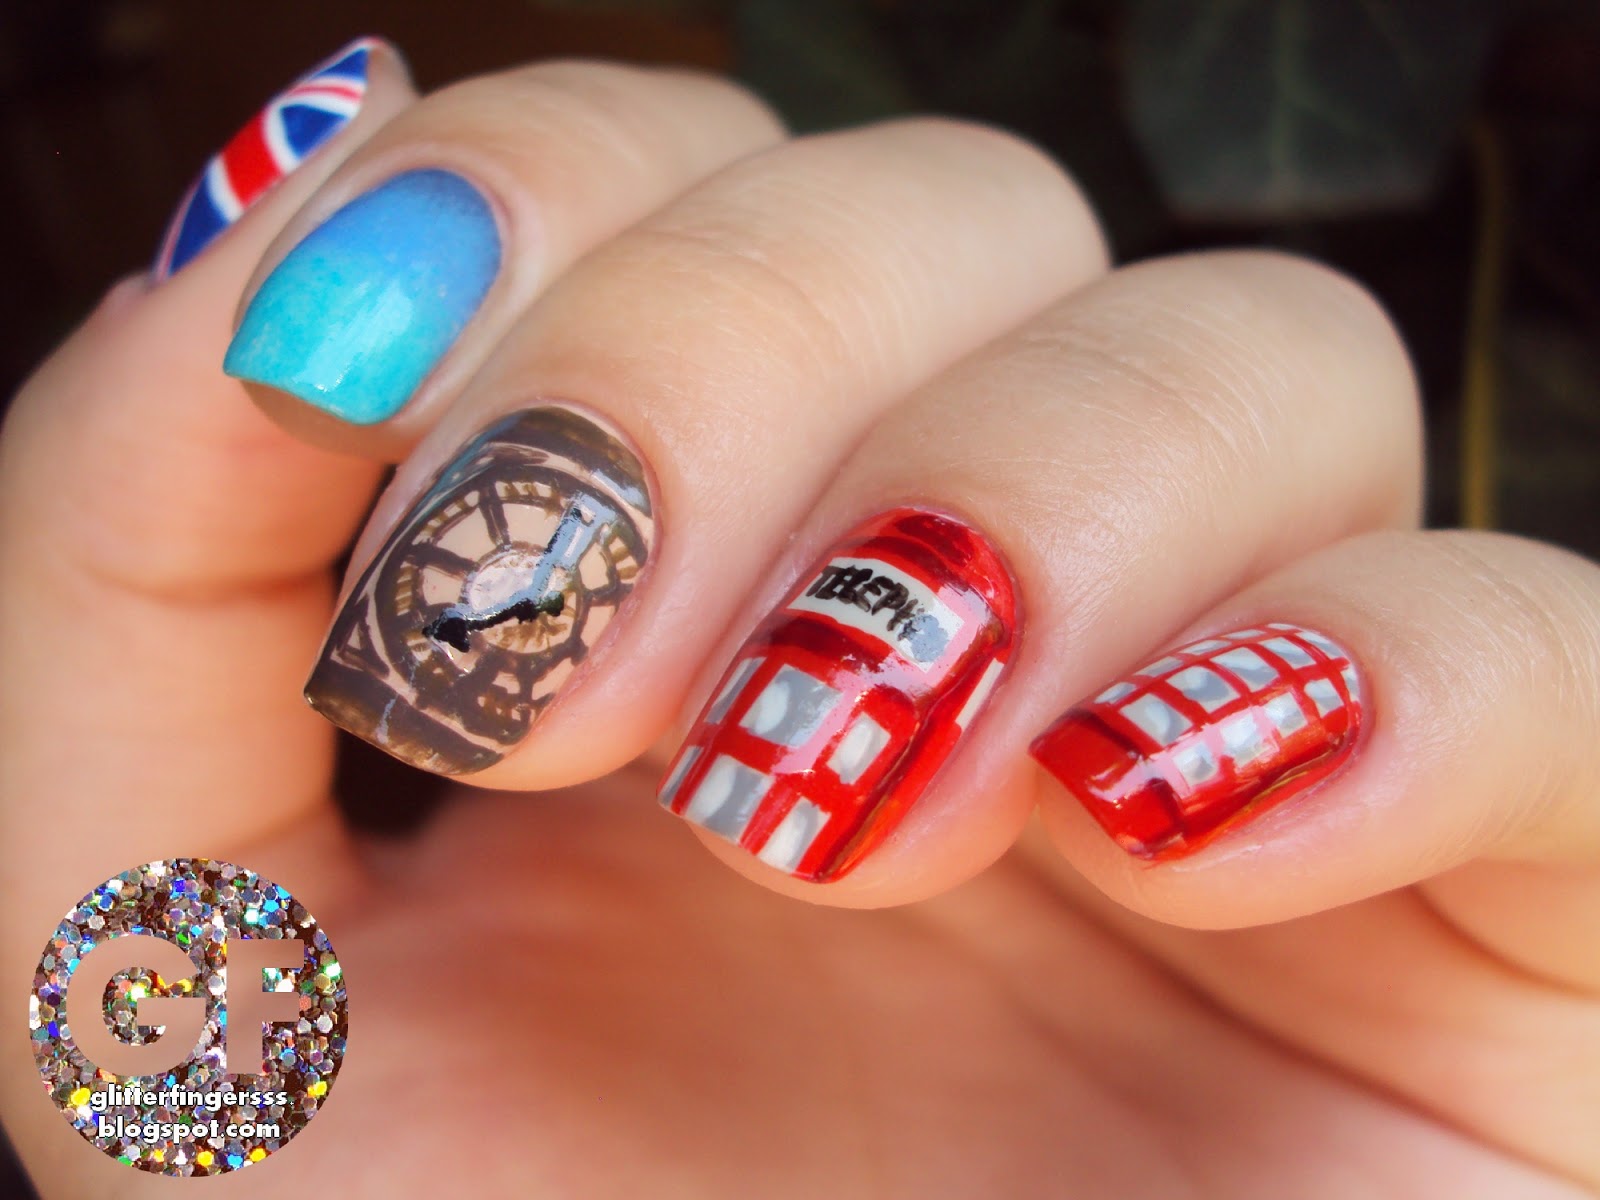 1. Crazy Nail Art London - The Best Nail Art in London - wide 6